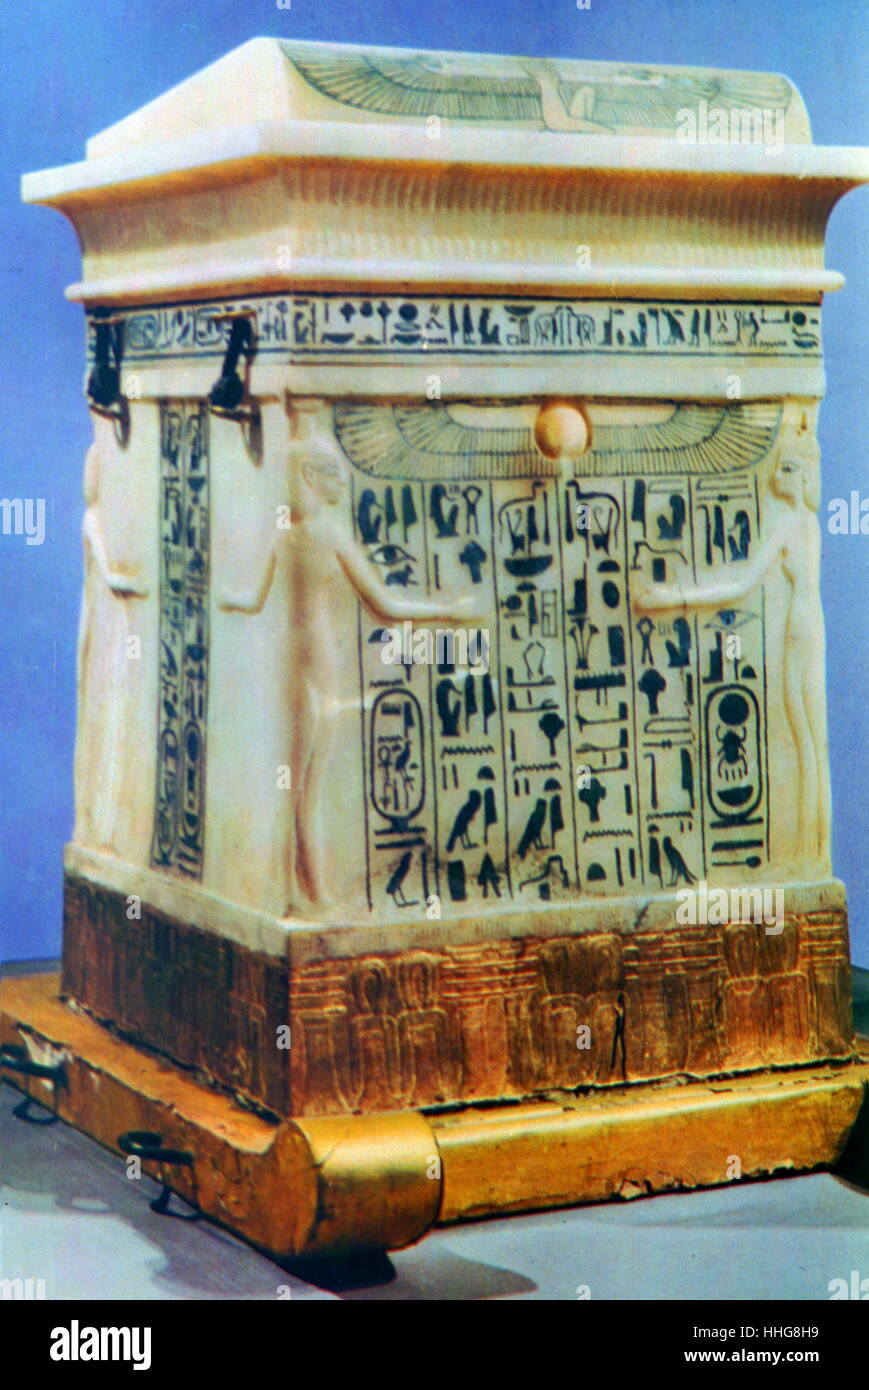 Alabaster canopic chest, used to contain the internal organs of during the process of mummification. From the tomb treasures of Tutankhamen, discovered in 1922. Tutankhamen was an Egyptian pharaoh of the 18th dynasty (ruled c. 1332–1323 BC). Now on display in the Cairo Museum. Stock Photo